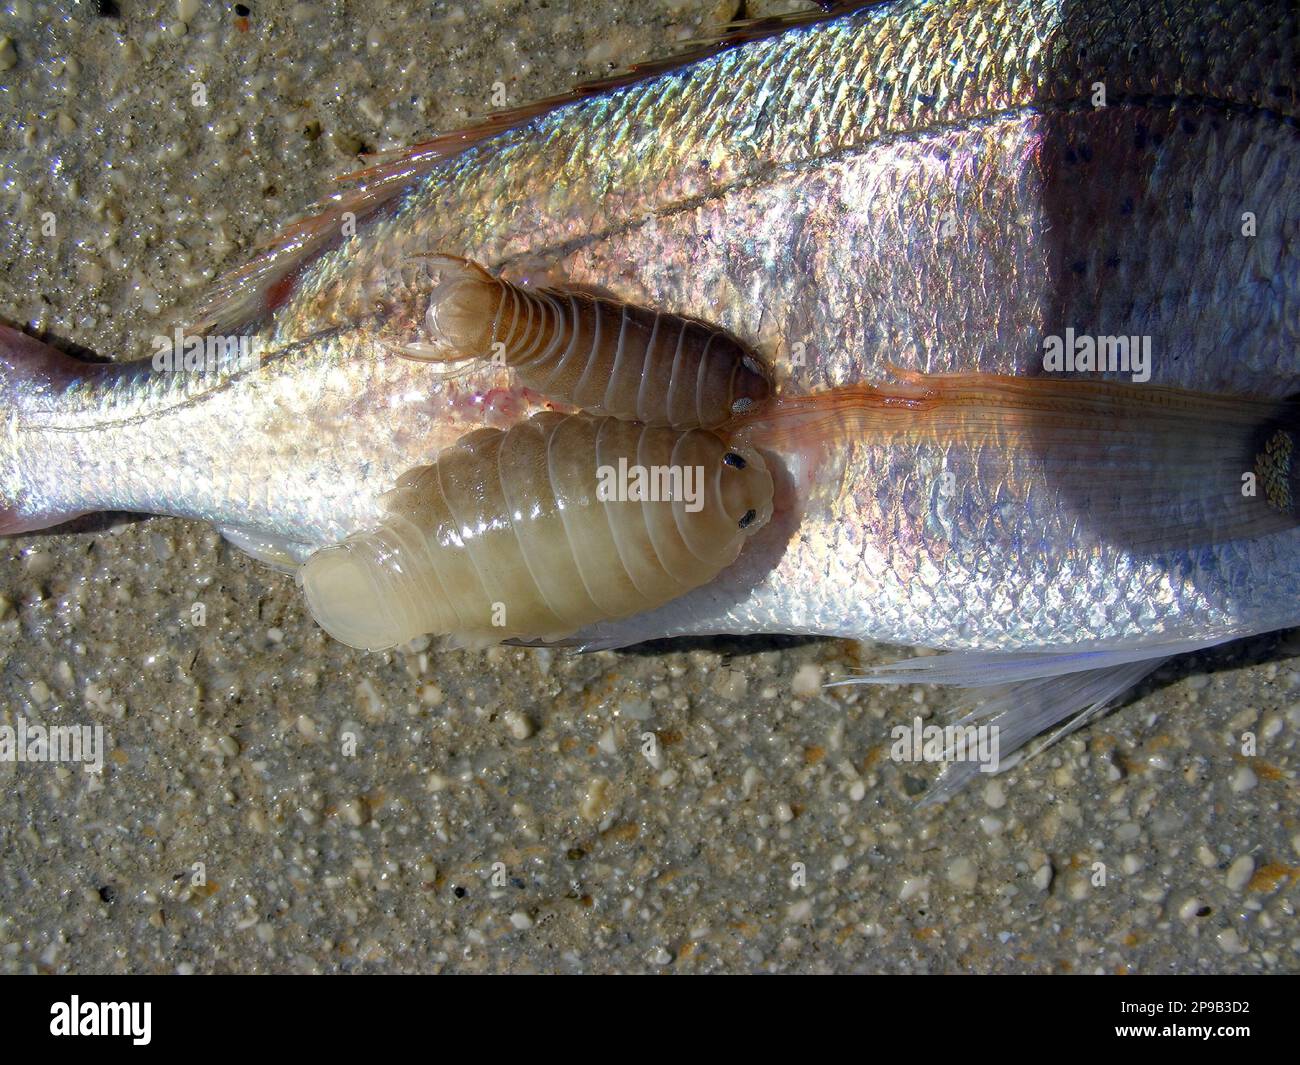 The common pandora (Pagellus erythrinus) a fish of the sea bream family, Sparidae with parasites Anilocra physodes attached to the side of the body. Stock Photo